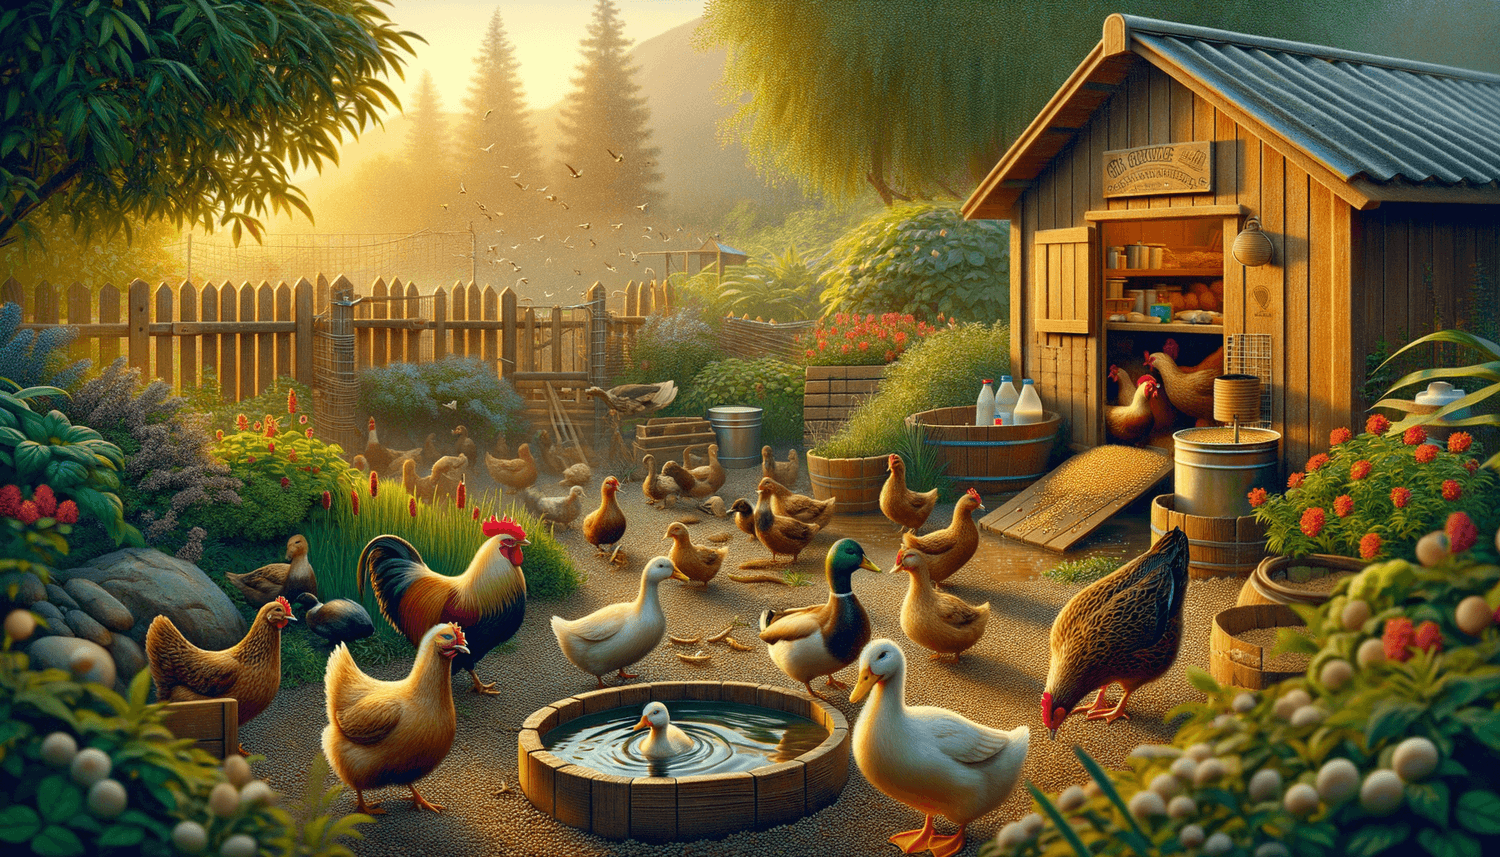 Can Chickens and Ducks Live Together?